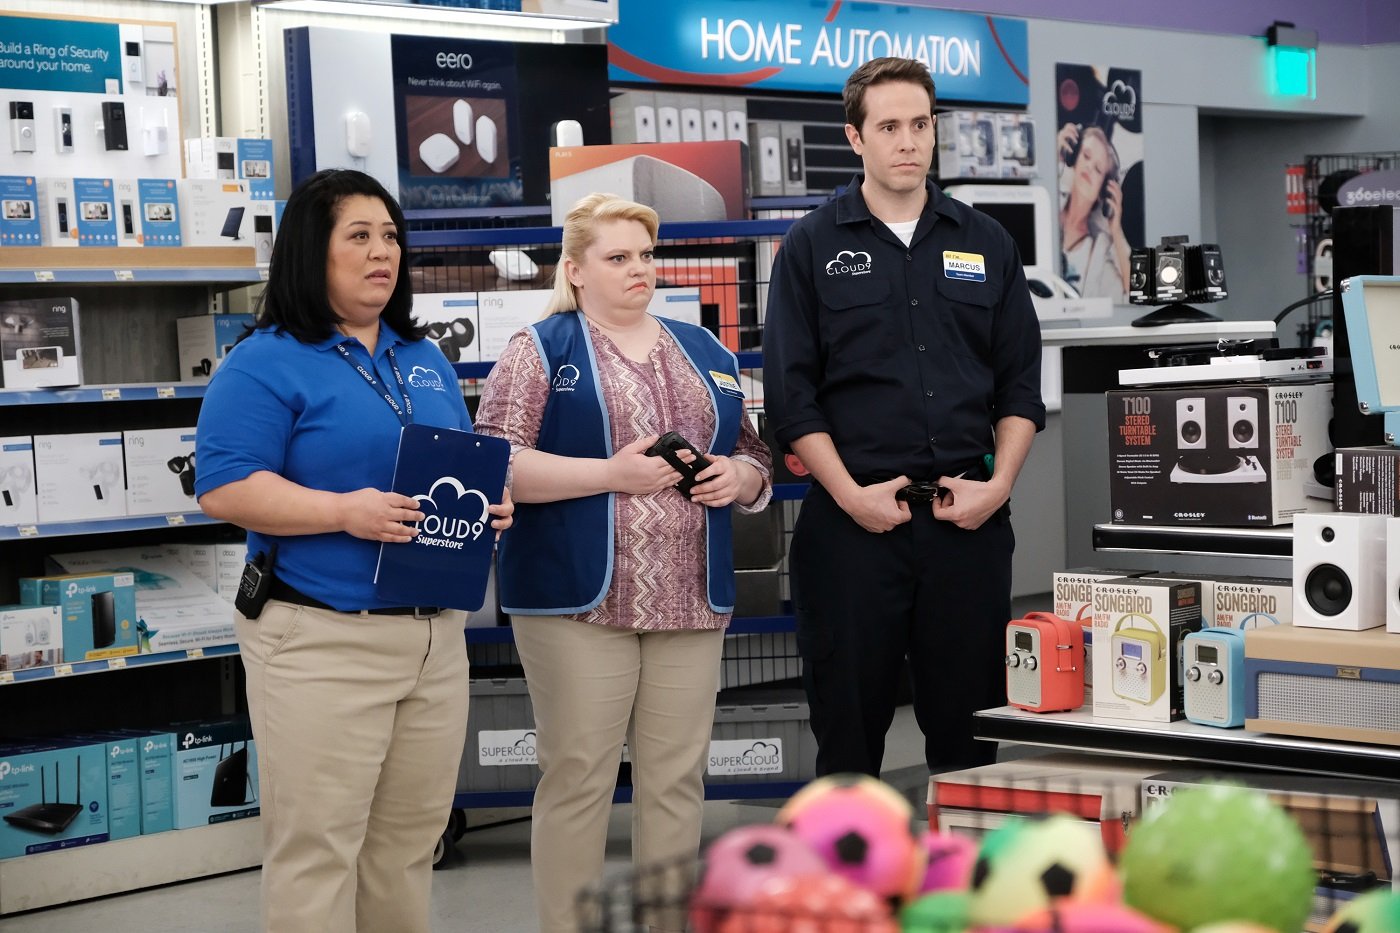 ‘Superstore’ Fans Could Return to Cloud 9 if Marcus Has Anything to Say About A Reunion